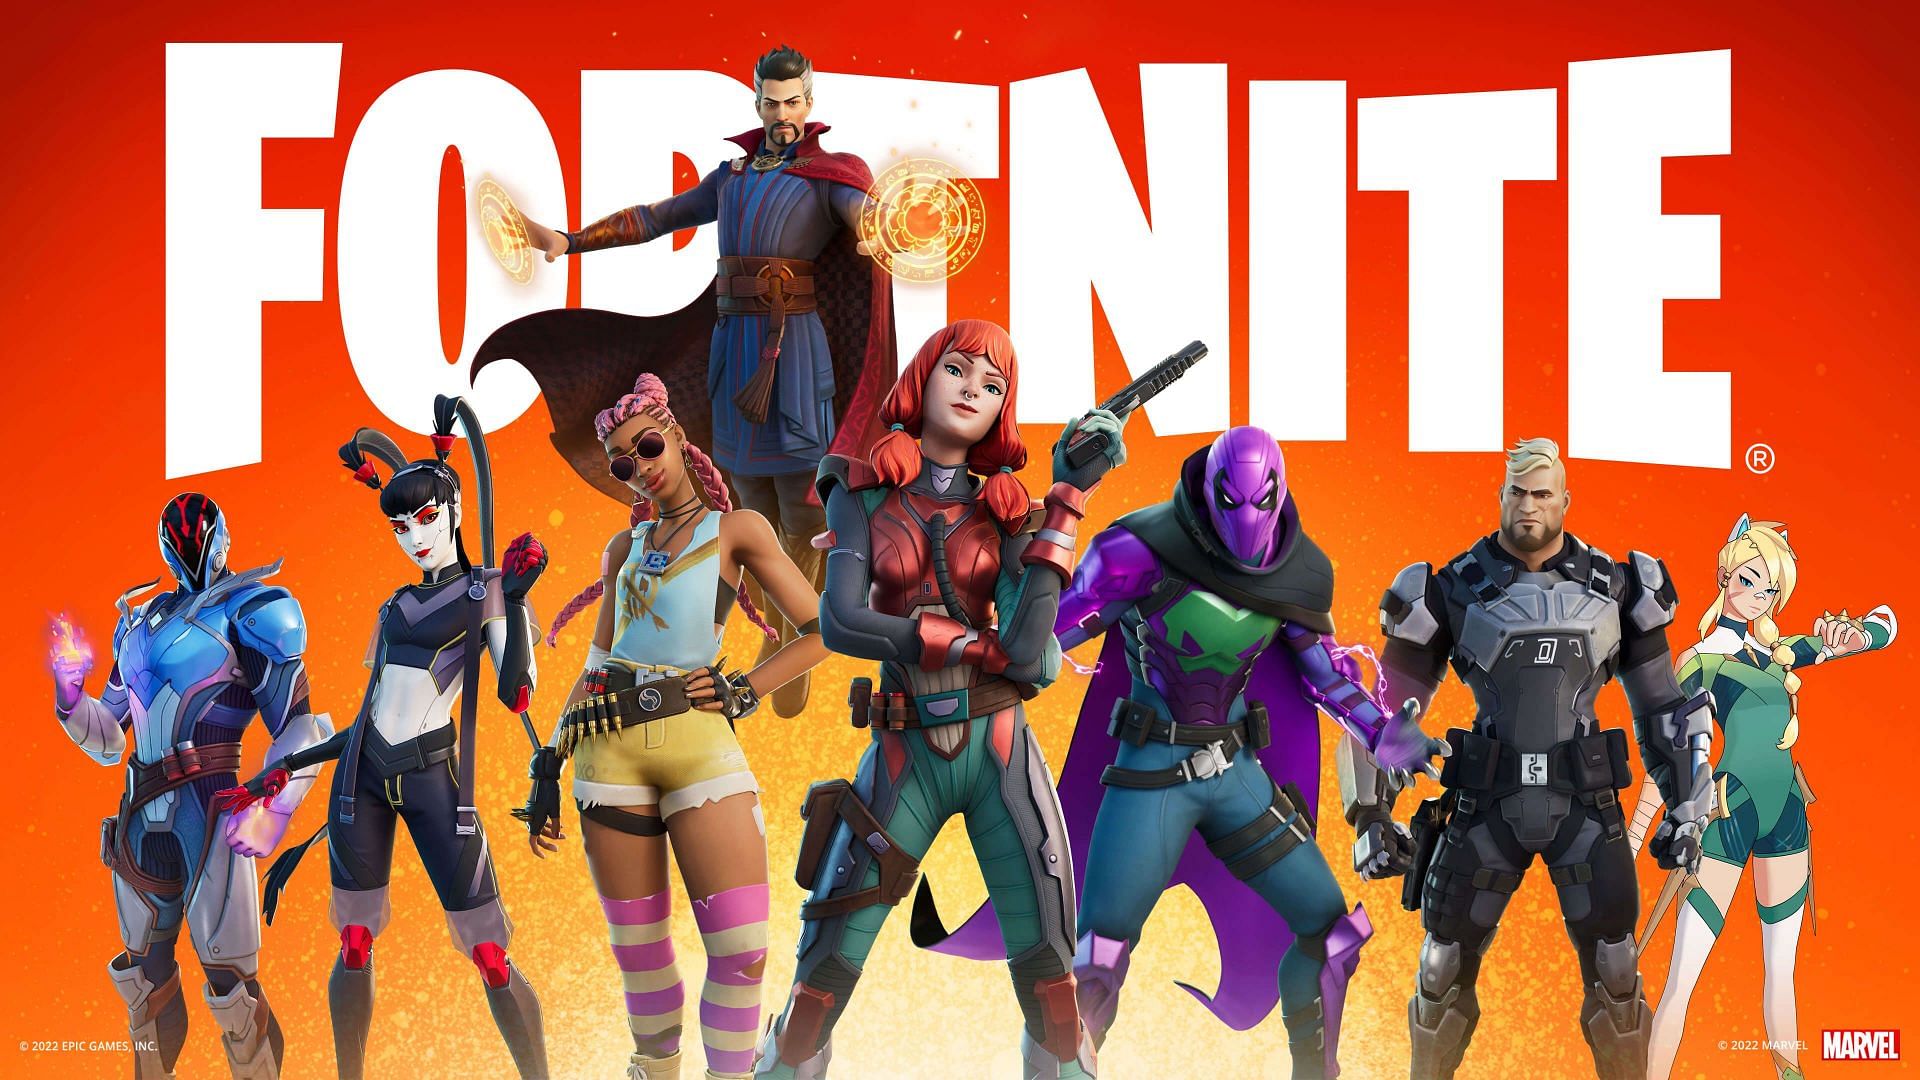 Battle Passes in Fortnite are starting to fall below expectations (Image via Epic Games/Fortnite)